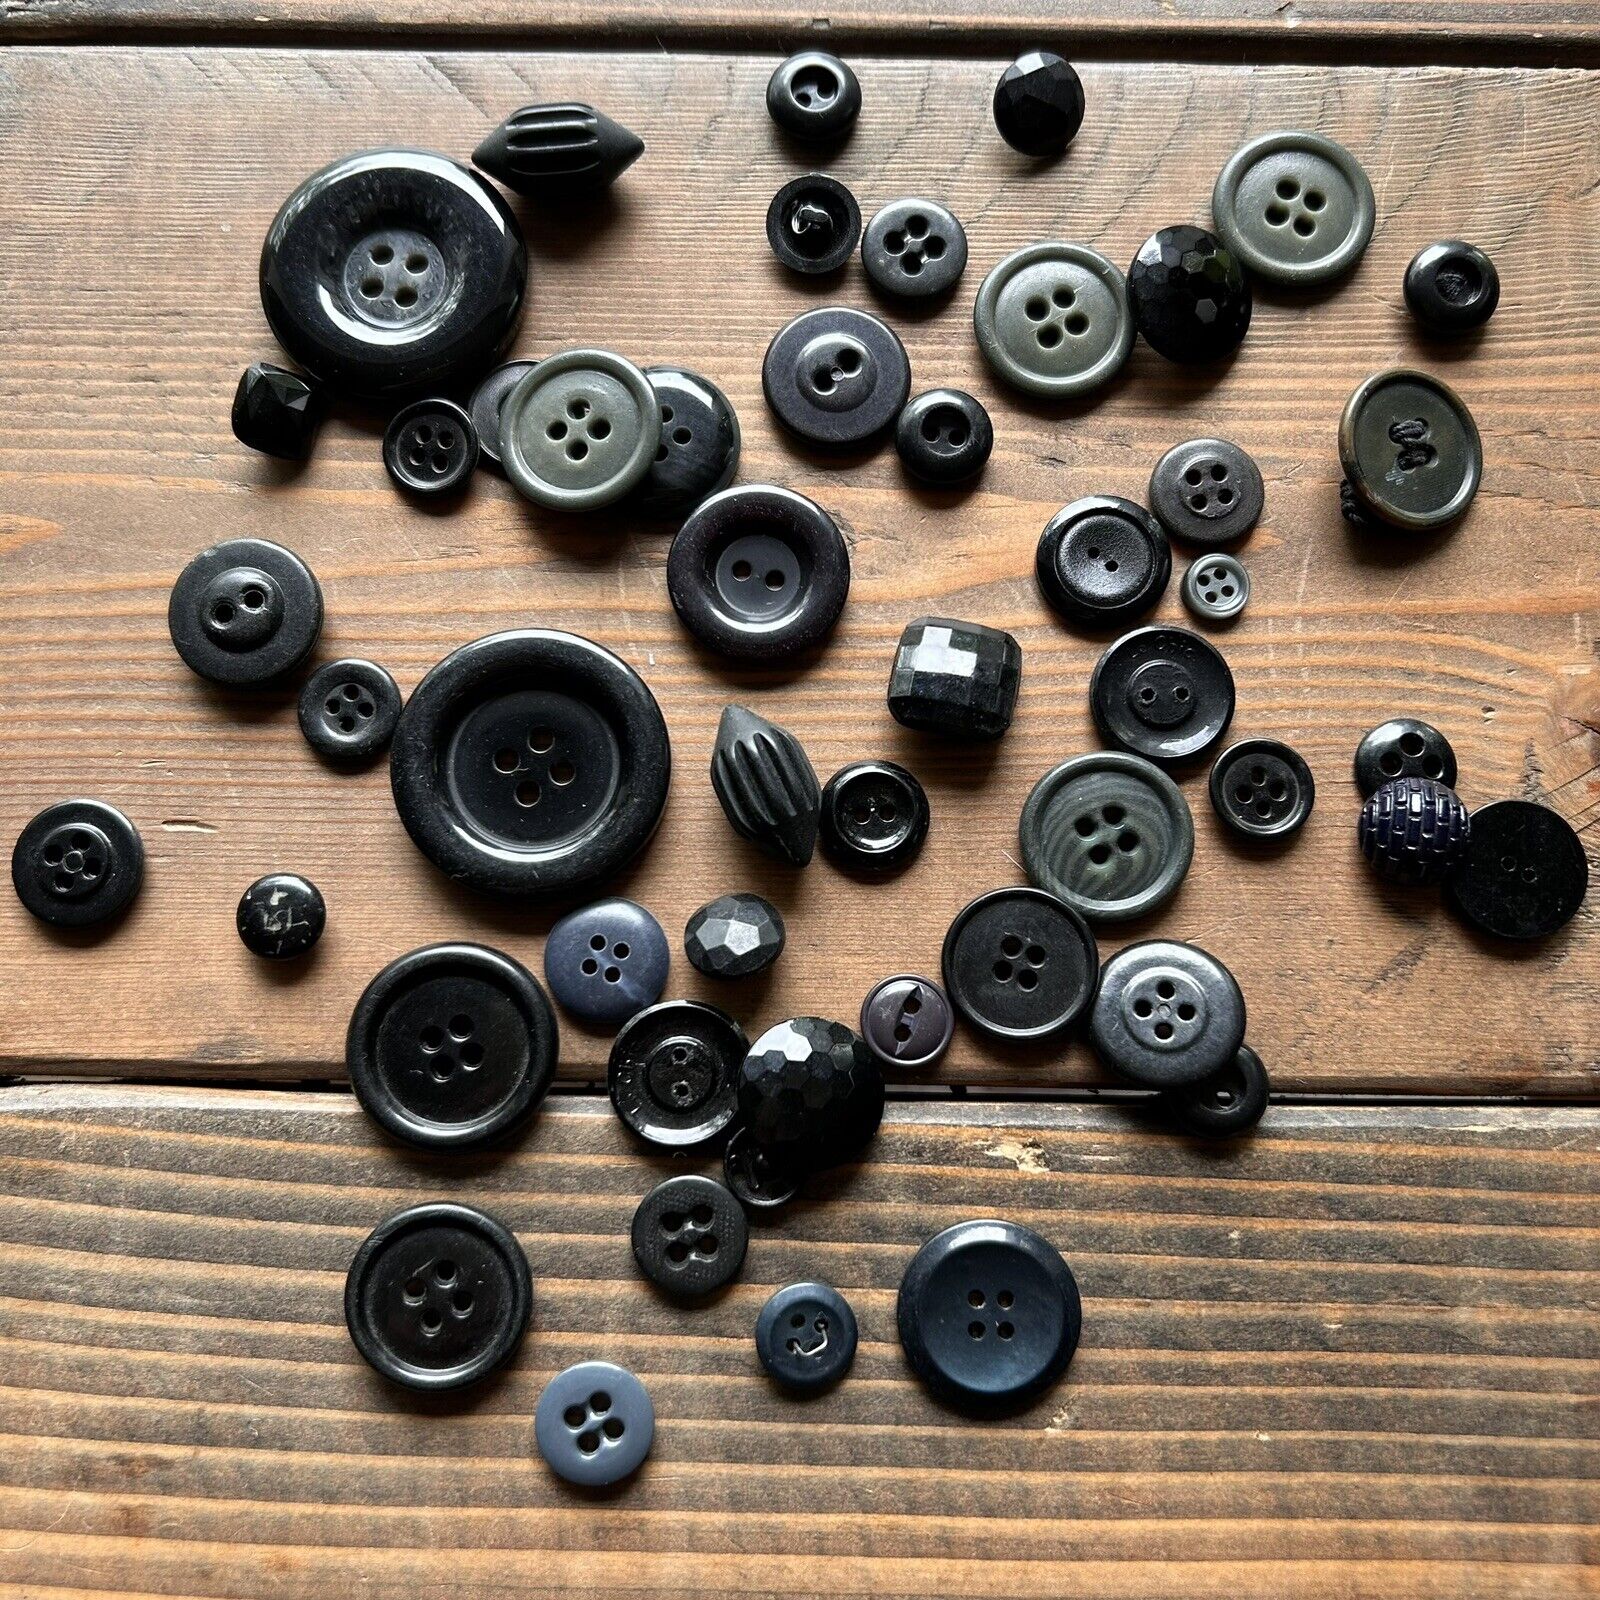 Lot Antique Vintage Assorted Black Gray Buttons Varying Sizes Shapes Materials